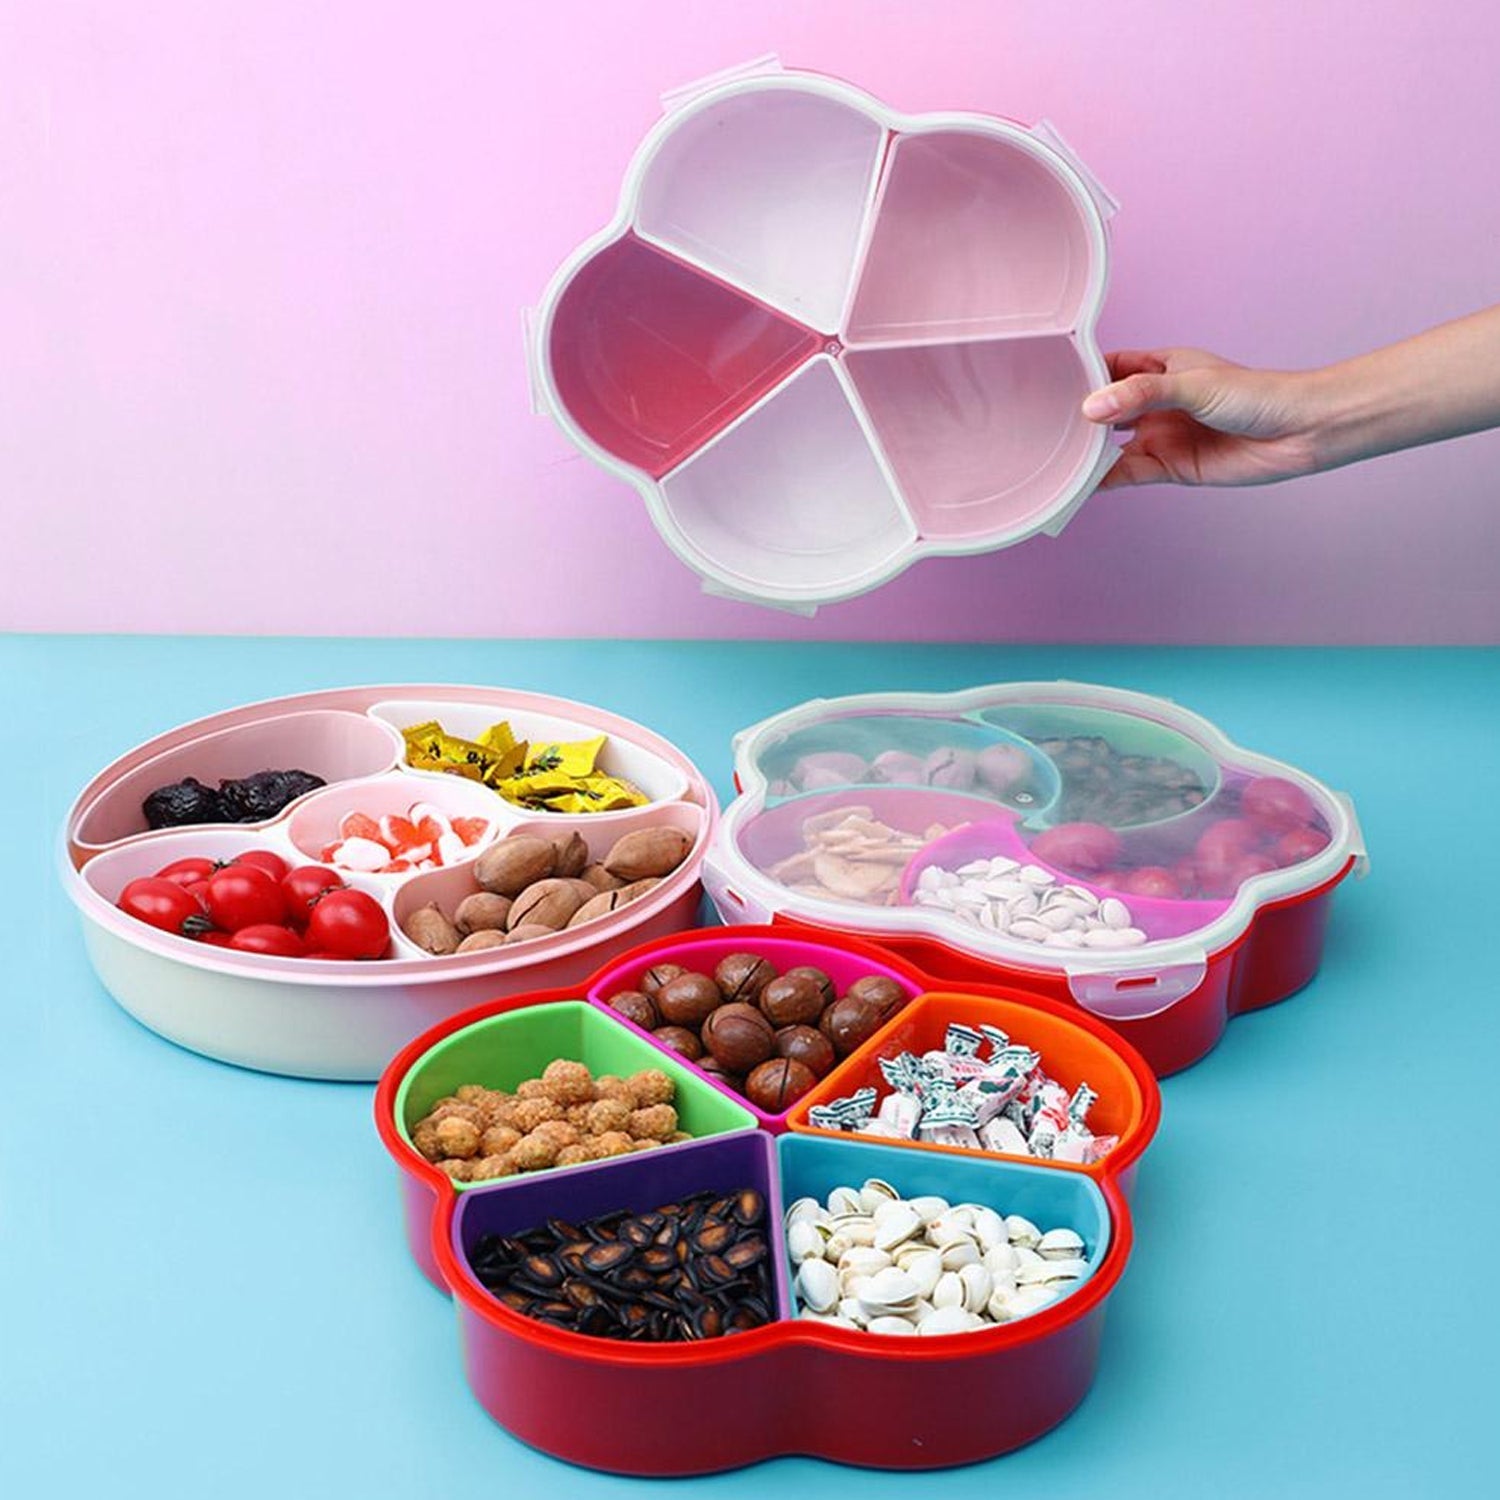 2863 5Compartments Party Food Storage Snack Nuts Box For Peanuts Fruits and Candy Box For Home & Kitchen Use DeoDap